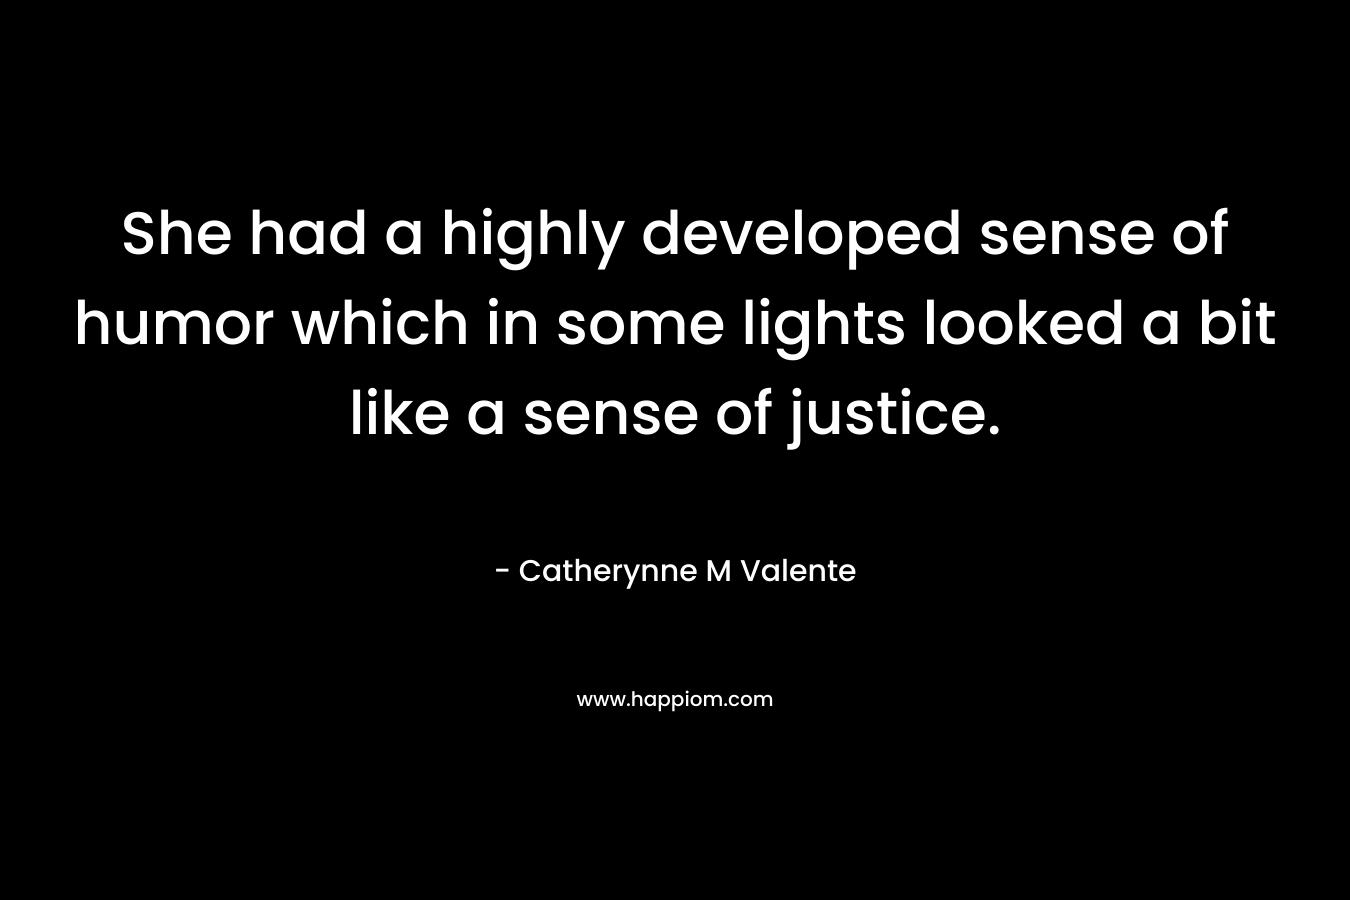 She had a highly developed sense of humor which in some lights looked a bit like a sense of justice. – Catherynne M Valente